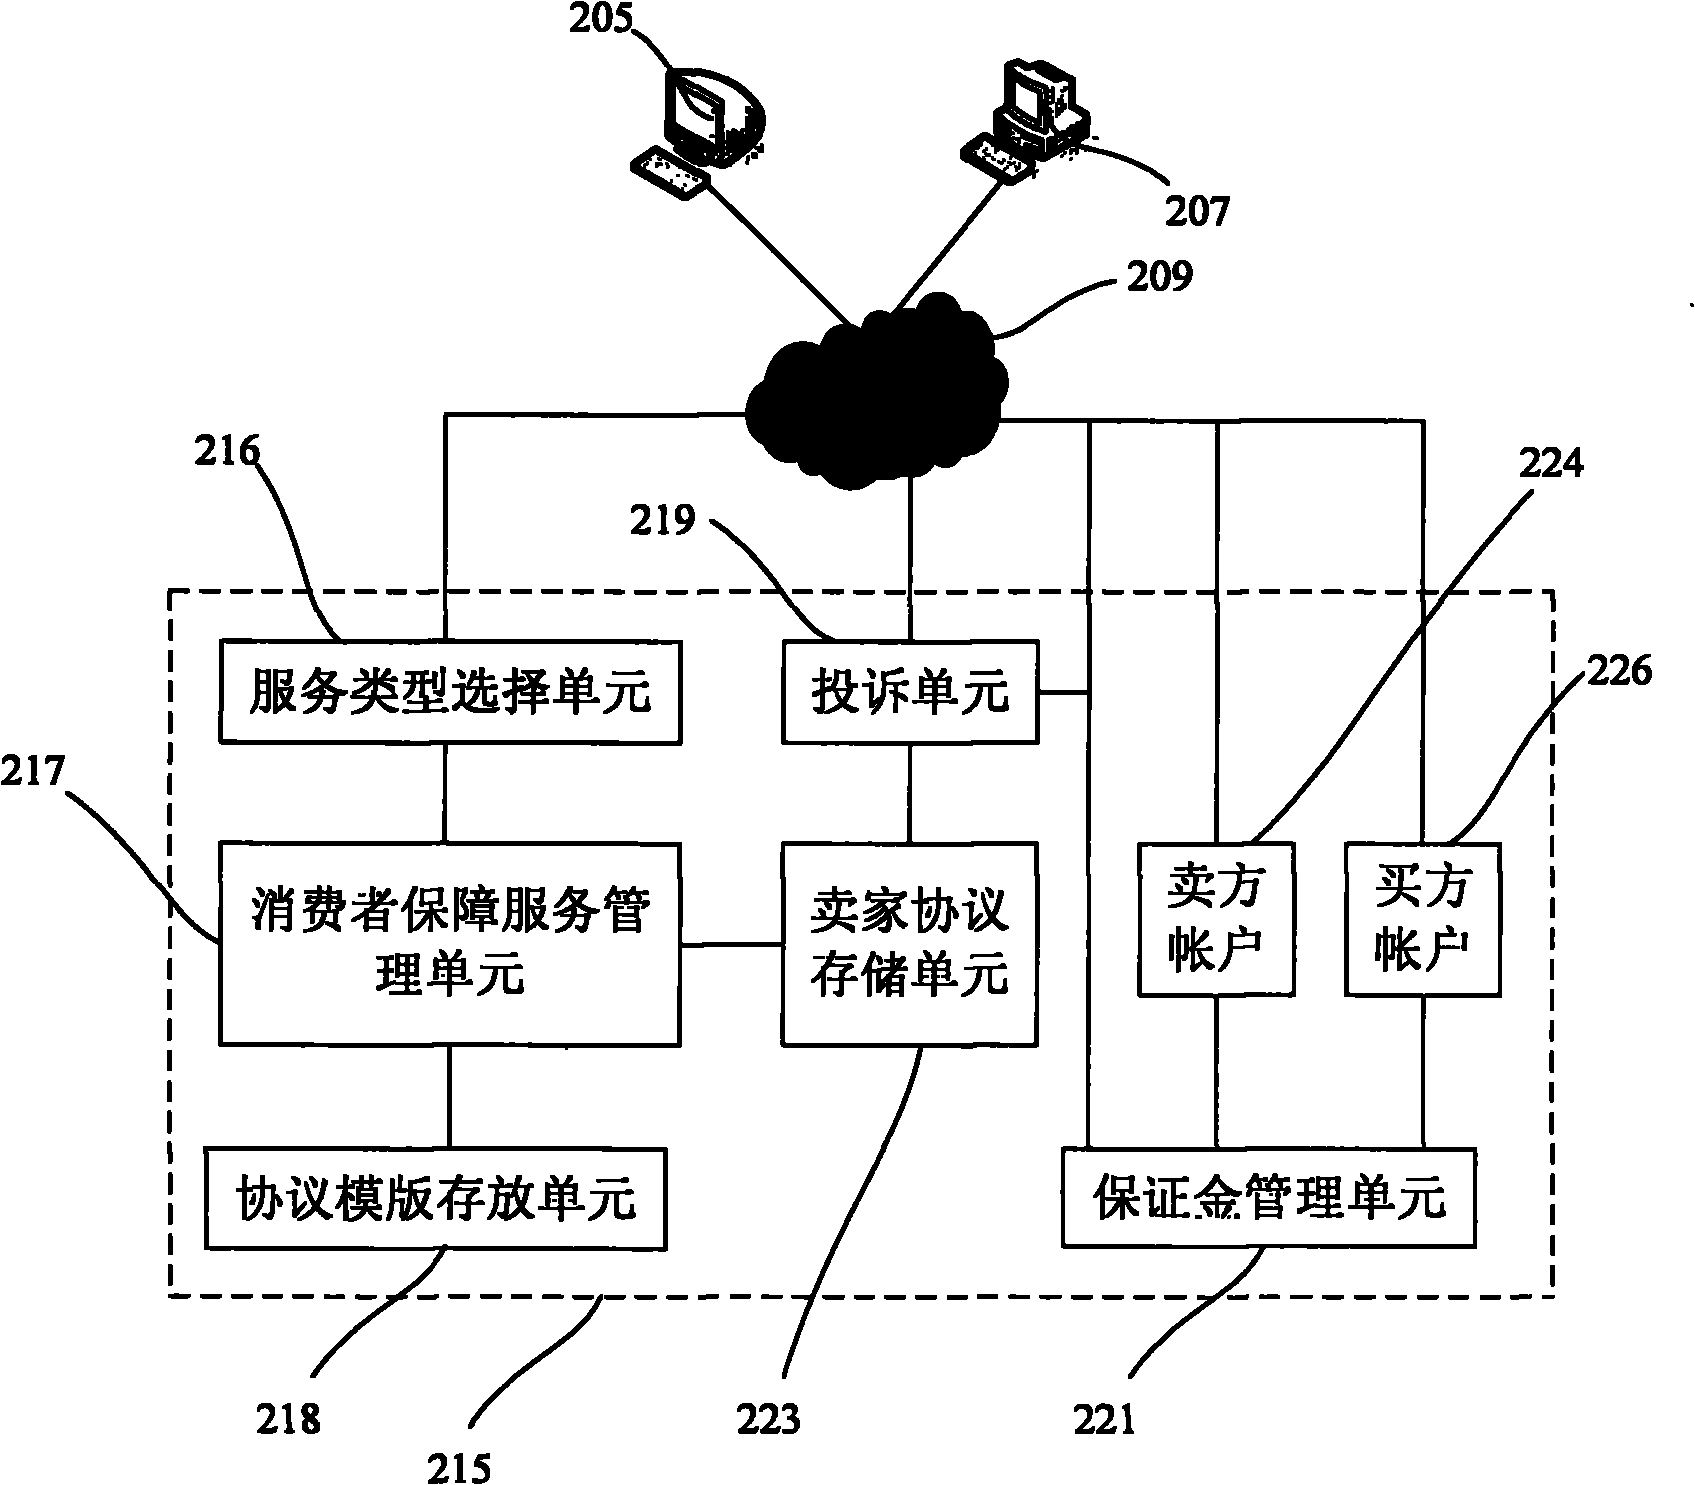 Consumer projection service system, method and online transaction architecture based on online transaction